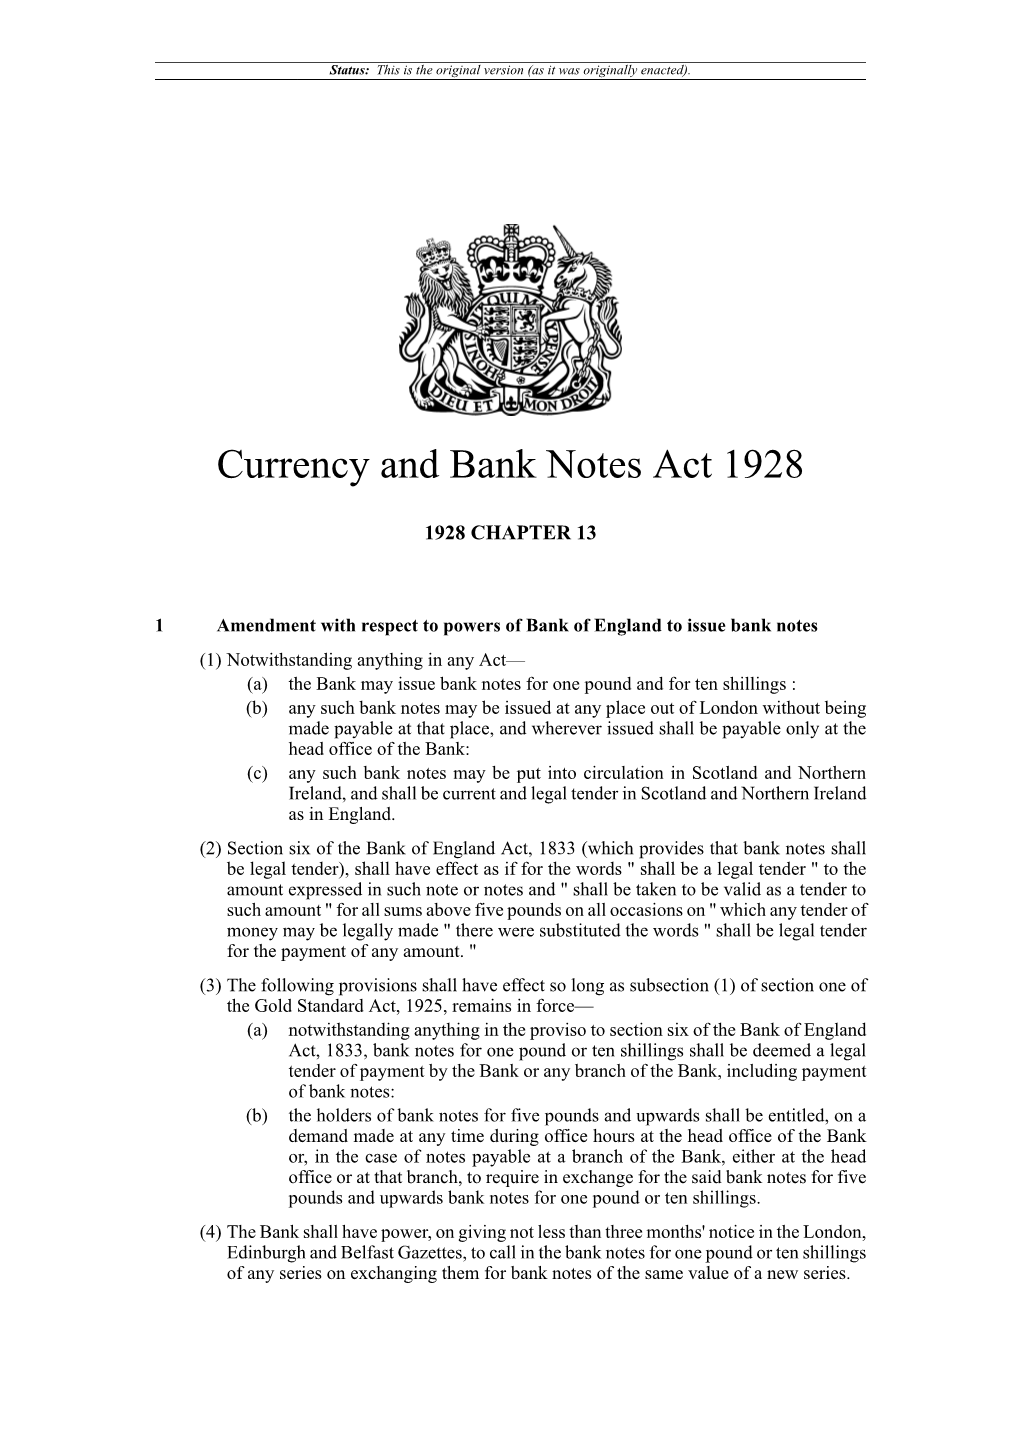 Currency and Bank Notes Act 1928